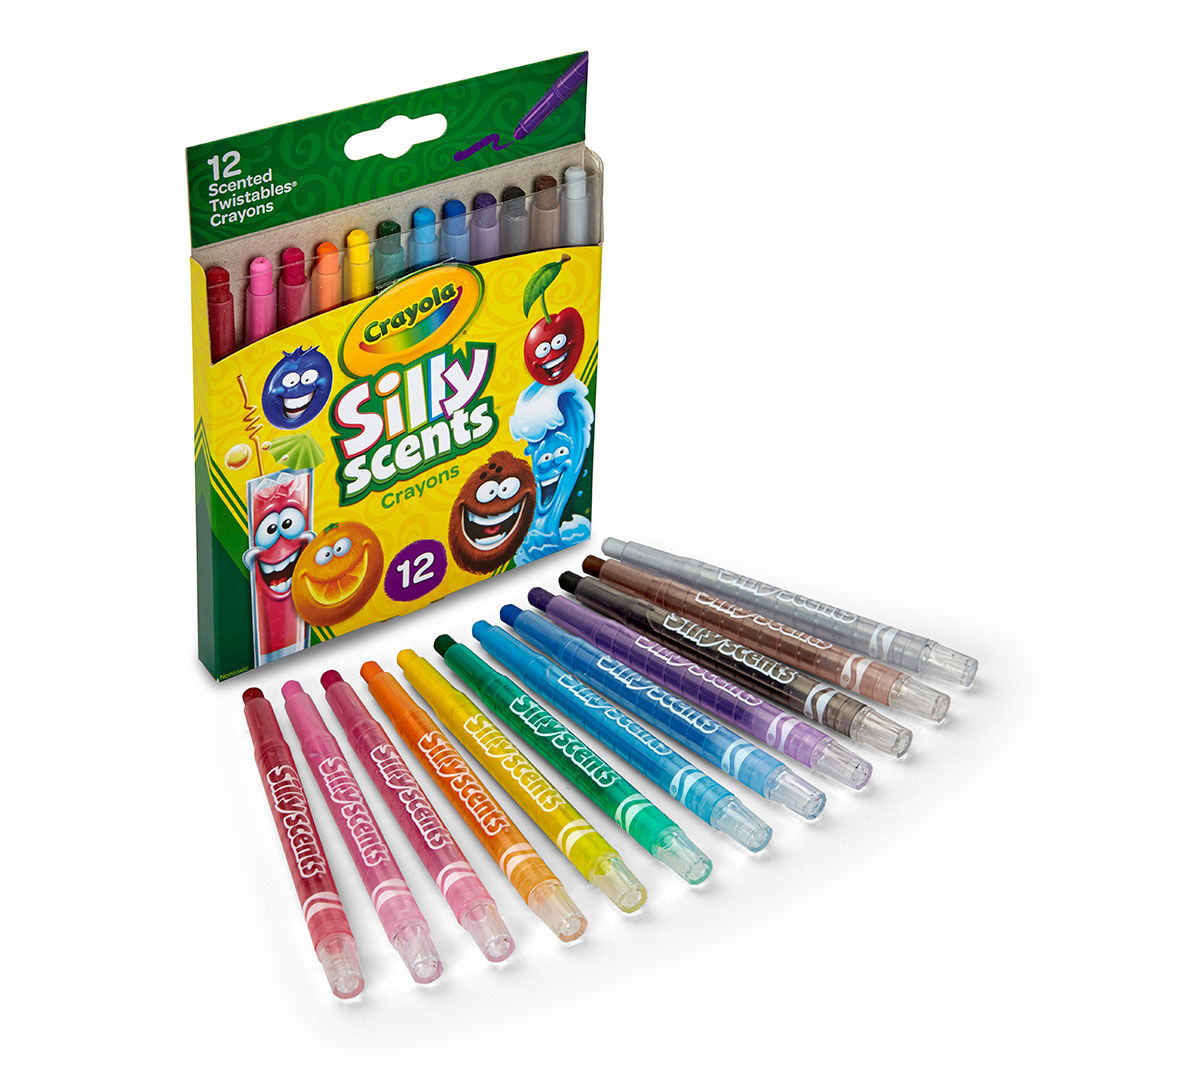 Silly Scents Mini Twistables Scented Crayons 12 ct.